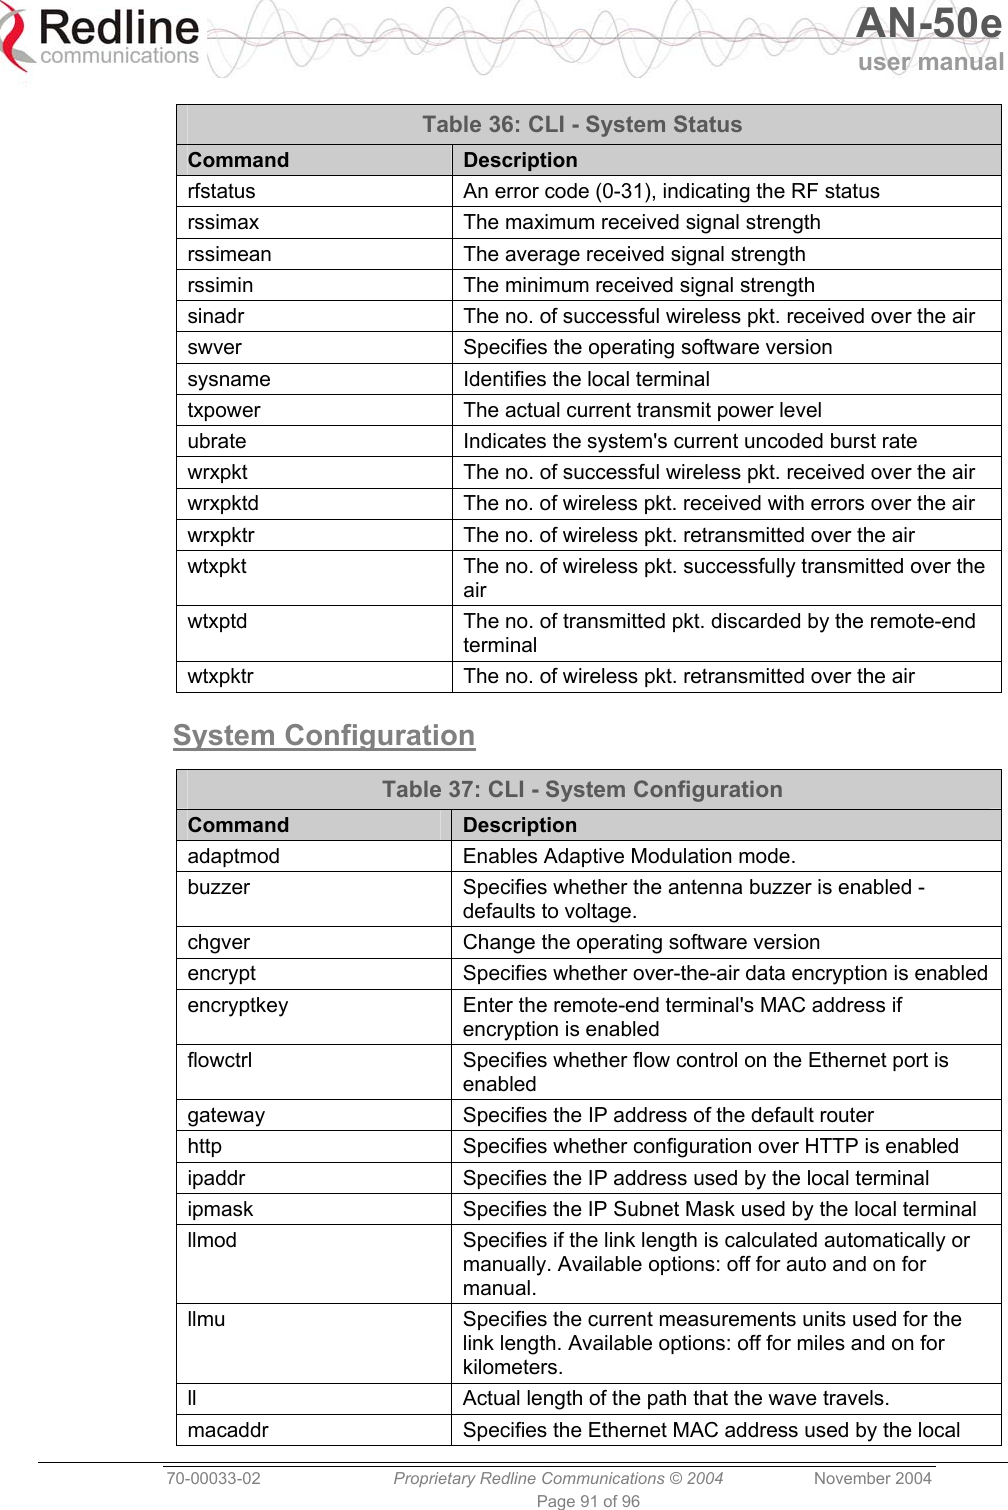   AN-50e user manual  70-00033-02  Proprietary Redline Communications © 2004 November 2004 Page 91 of 96 Table 36: CLI - System Status Command  Description rfstatus  An error code (0-31), indicating the RF status rssimax  The maximum received signal strength rssimean  The average received signal strength rssimin  The minimum received signal strength sinadr  The no. of successful wireless pkt. received over the air swver  Specifies the operating software version sysname  Identifies the local terminal txpower  The actual current transmit power level ubrate Indicates the system&apos;s current uncoded burst rate wrxpkt  The no. of successful wireless pkt. received over the air wrxpktd  The no. of wireless pkt. received with errors over the air wrxpktr  The no. of wireless pkt. retransmitted over the air wtxpkt  The no. of wireless pkt. successfully transmitted over the air wtxptd  The no. of transmitted pkt. discarded by the remote-end terminal wtxpktr  The no. of wireless pkt. retransmitted over the air System Configuration  Table 37: CLI - System Configuration Command  Description adaptmod  Enables Adaptive Modulation mode.  buzzer  Specifies whether the antenna buzzer is enabled - defaults to voltage. chgver  Change the operating software version encrypt Specifies whether over-the-air data encryption is enabled encryptkey  Enter the remote-end terminal&apos;s MAC address if encryption is enabled flowctrl  Specifies whether flow control on the Ethernet port is enabled gateway  Specifies the IP address of the default router http  Specifies whether configuration over HTTP is enabled ipaddr  Specifies the IP address used by the local terminal ipmask  Specifies the IP Subnet Mask used by the local terminal llmod  Specifies if the link length is calculated automatically or manually. Available options: off for auto and on for manual. llmu  Specifies the current measurements units used for the link length. Available options: off for miles and on for kilometers. ll  Actual length of the path that the wave travels. macaddr  Specifies the Ethernet MAC address used by the local 